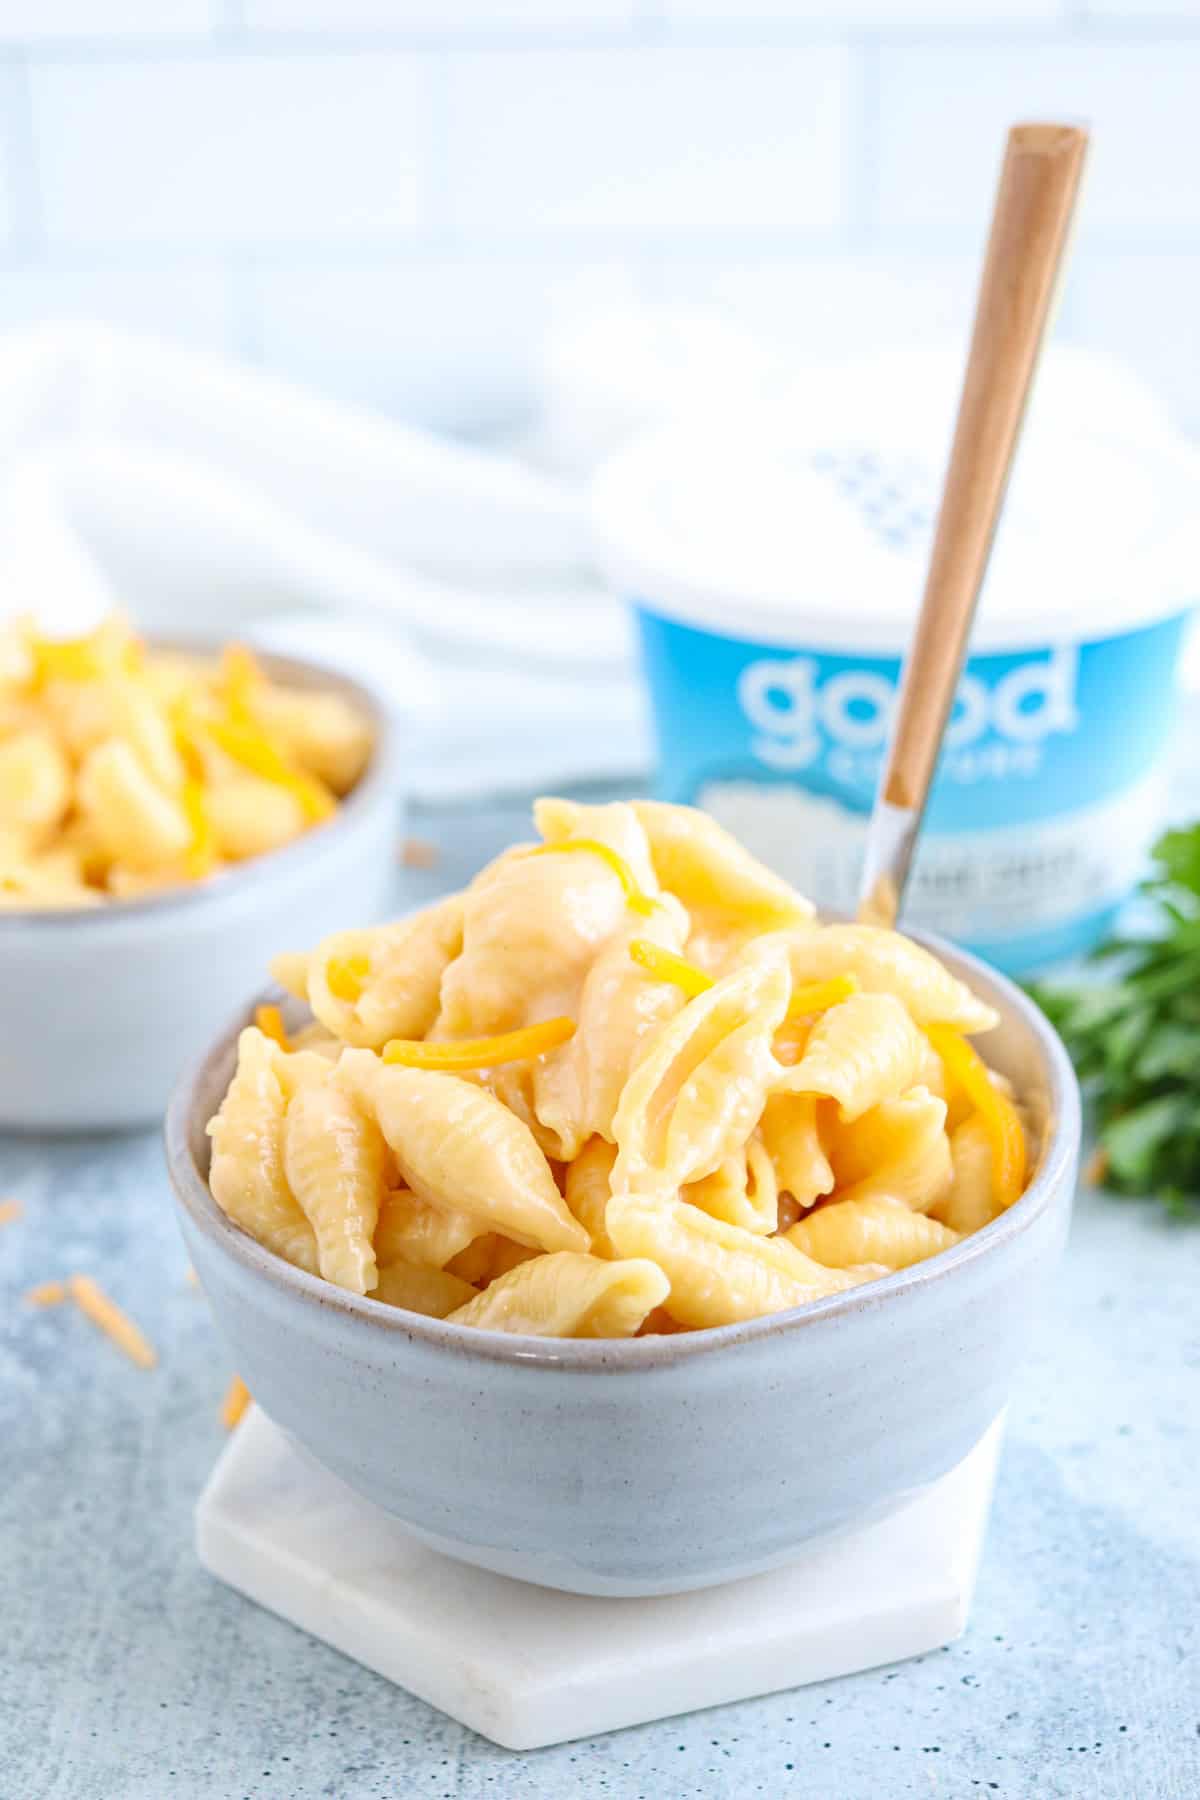 creamy mac and cheese in a small greay bowl on gray background.